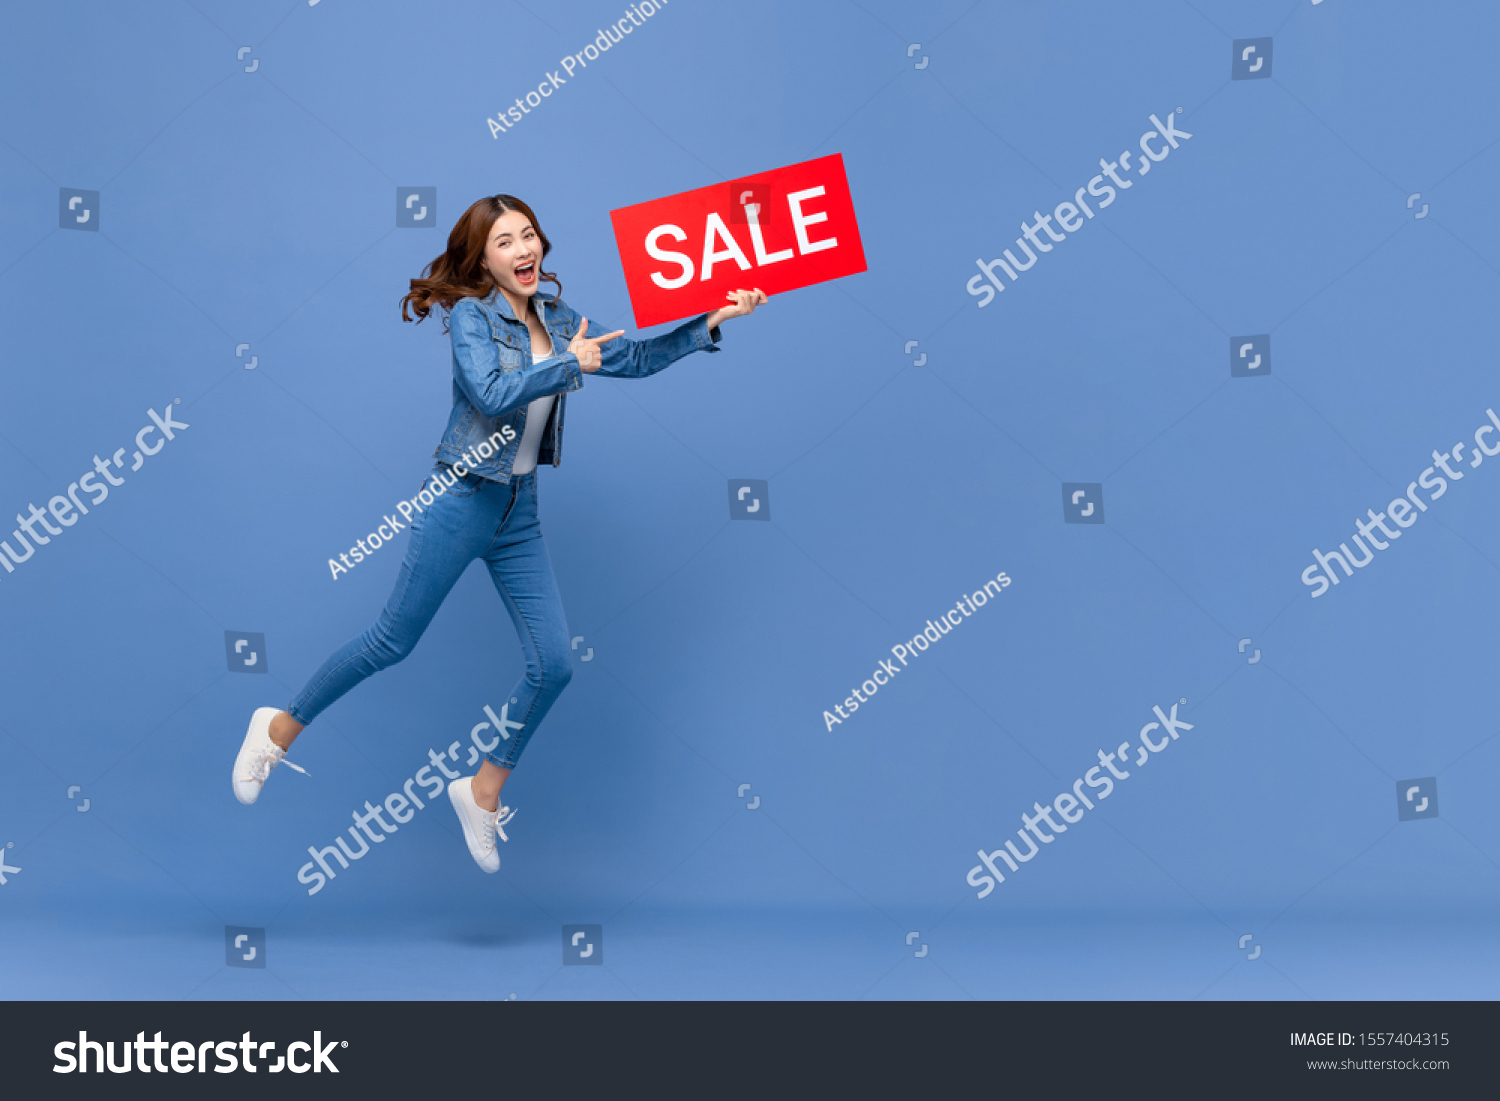 Excited Asian woman in casual jean clothes jumping with red sale sign in hand isolated on light blue background with copy space #1557404315